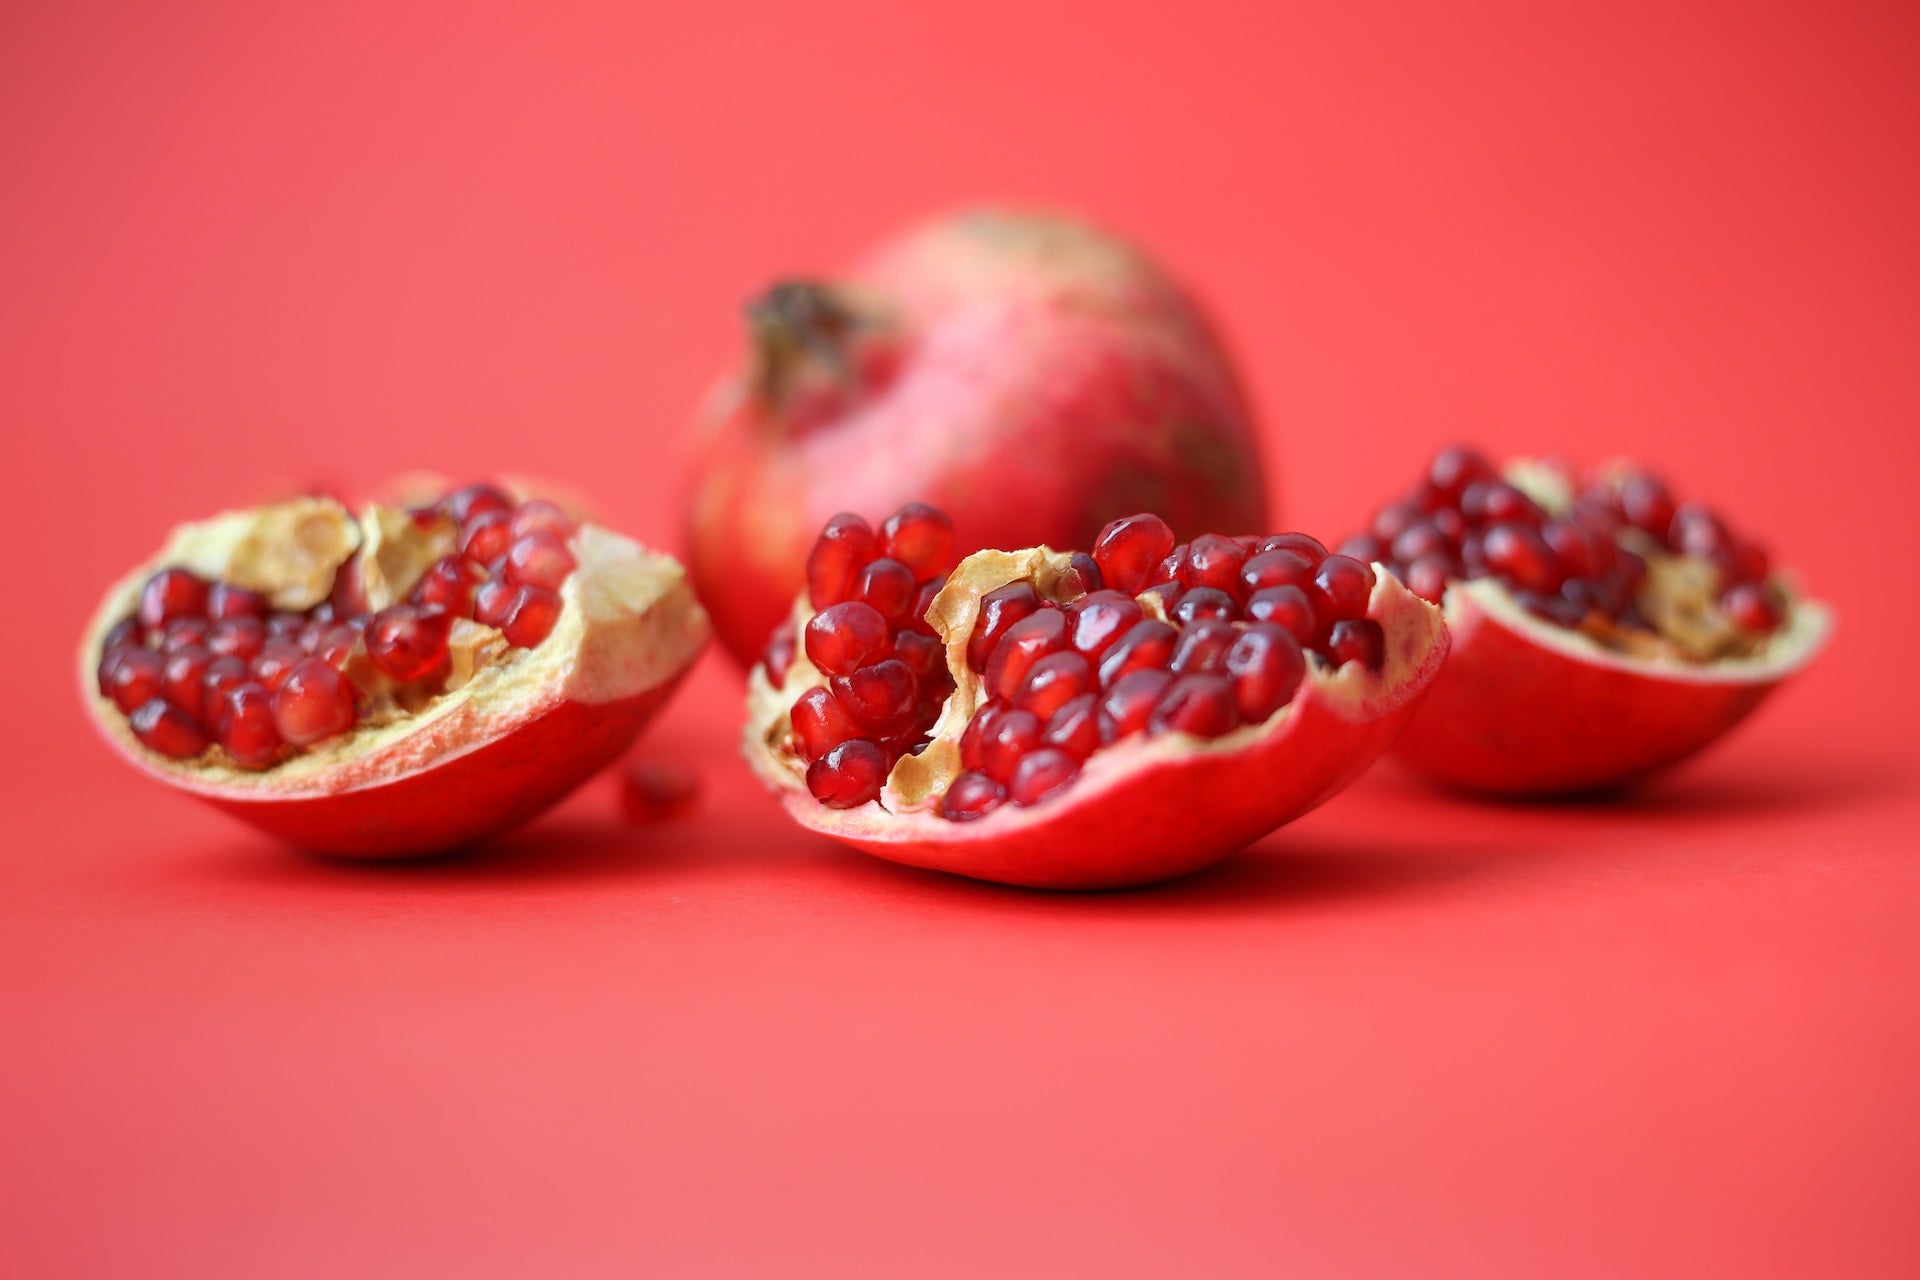 Pomegranate Peel: A Natural Shield for Your Immune System